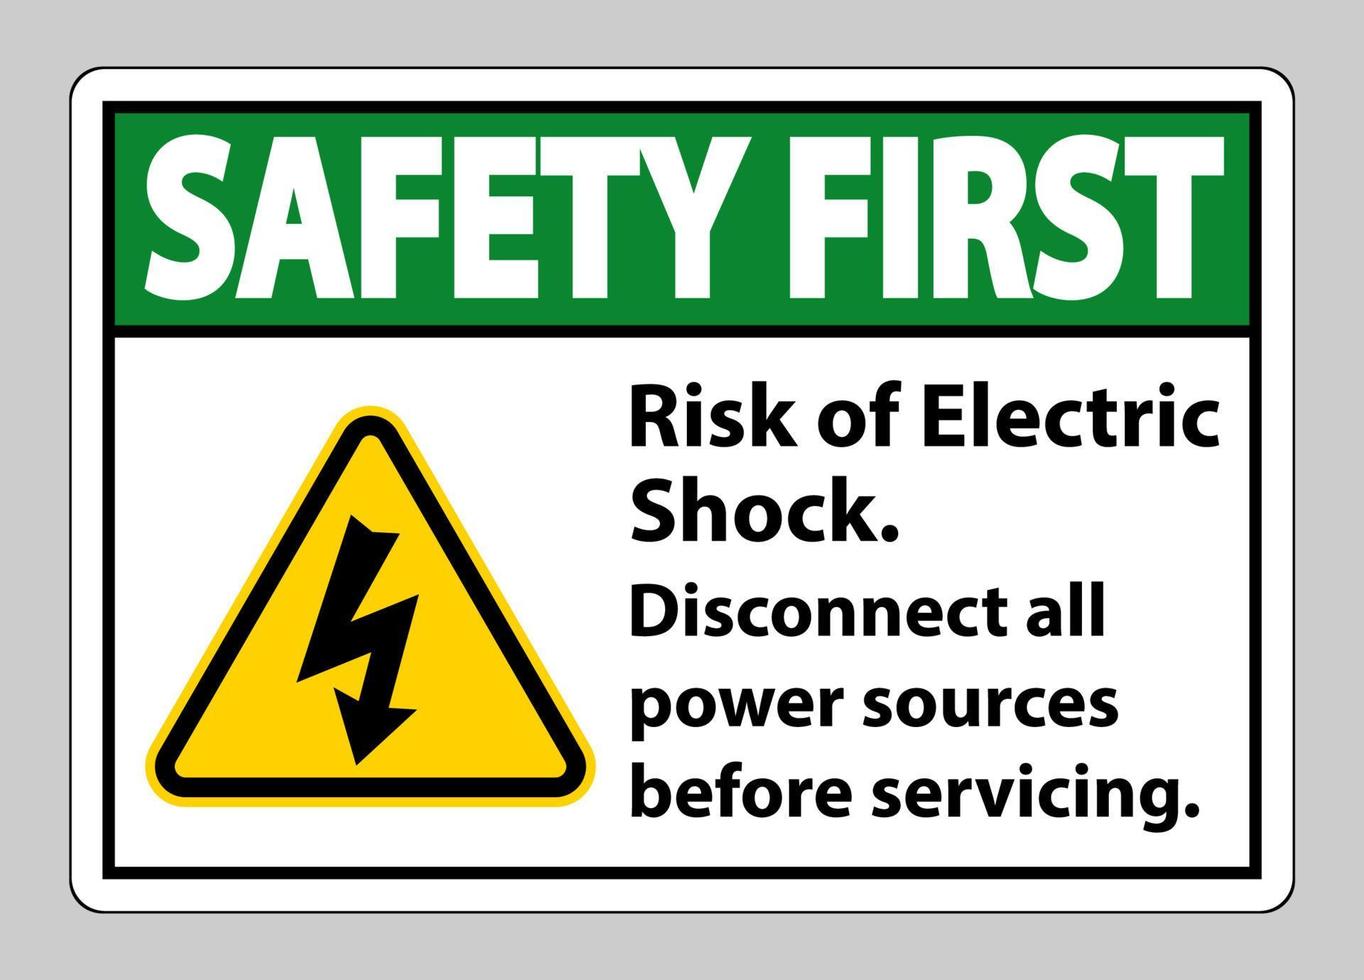 Safety first Risk of electric shock Symbol Sign Isolate on White Background vector